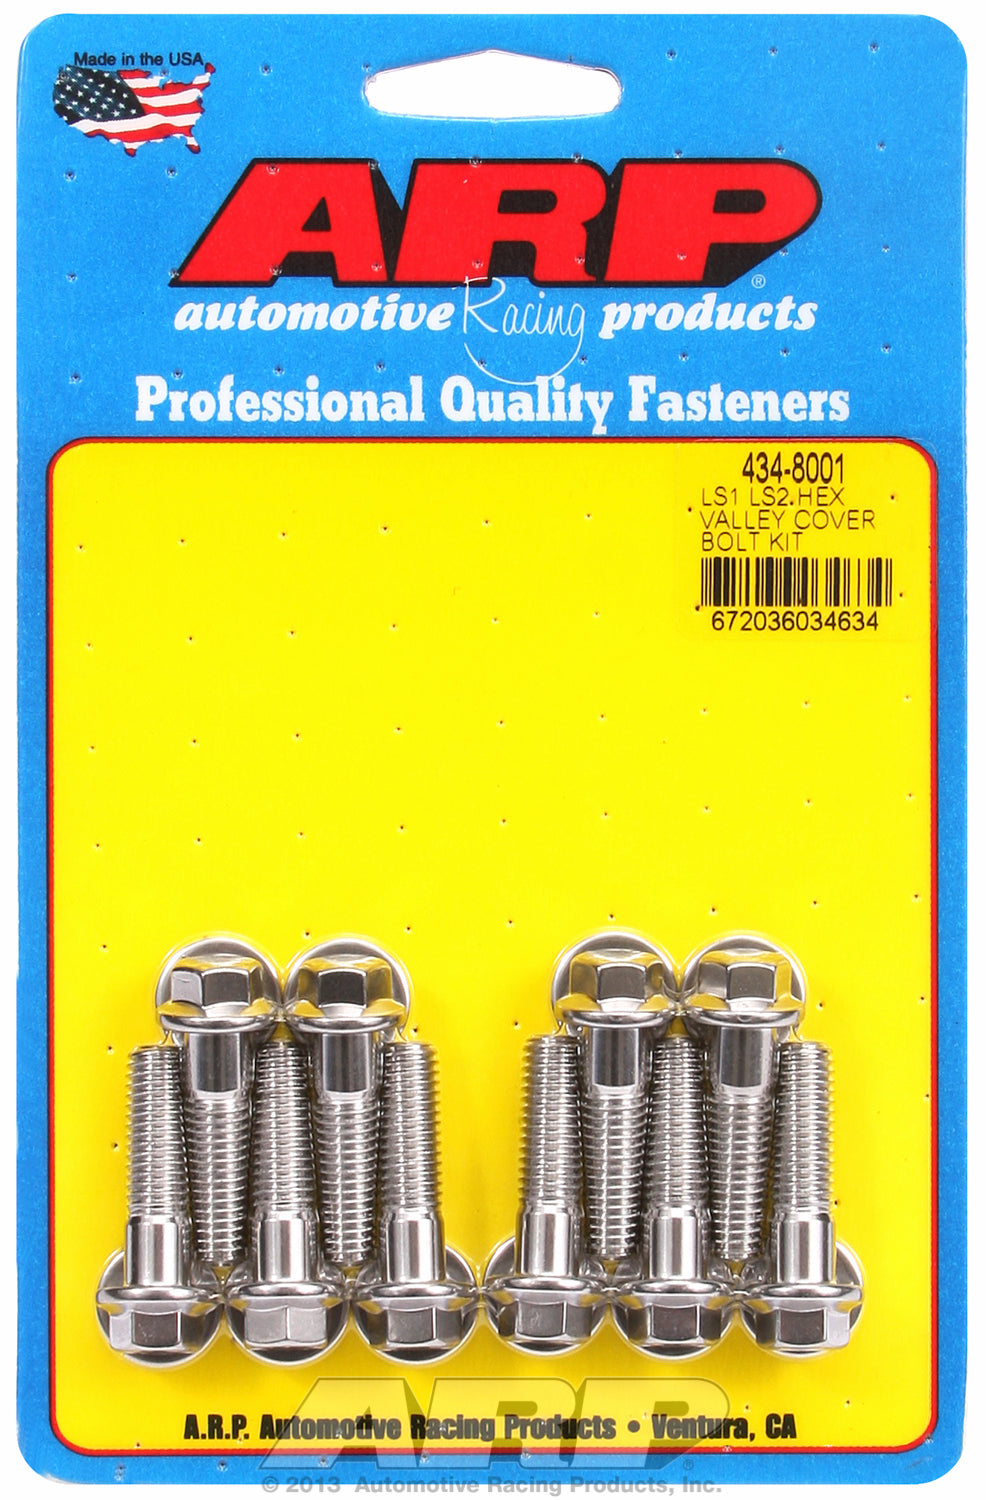 Hex Head Stainless Intake Manifold Bolts for Chevrolet Gen III/IV LS Series small block, valley cove